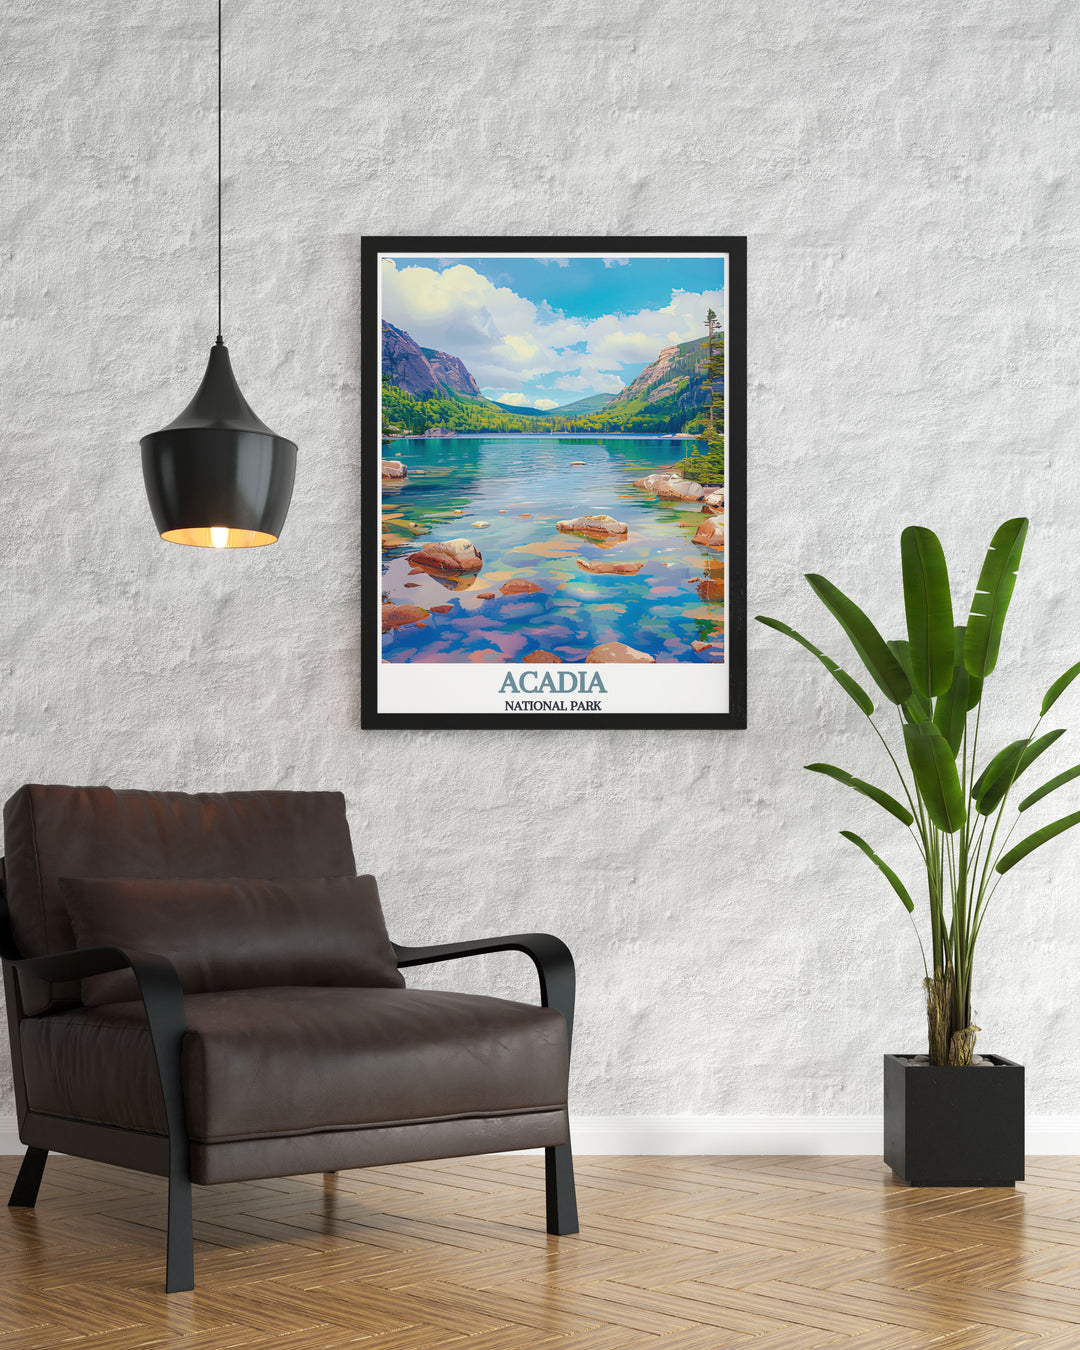 Beautifully detailed Jordan Pond artwork from Acadia National Park ideal for adding a unique and elegant touch to your home or office decor perfect gift for nature lovers and fans of vintage travel posters.